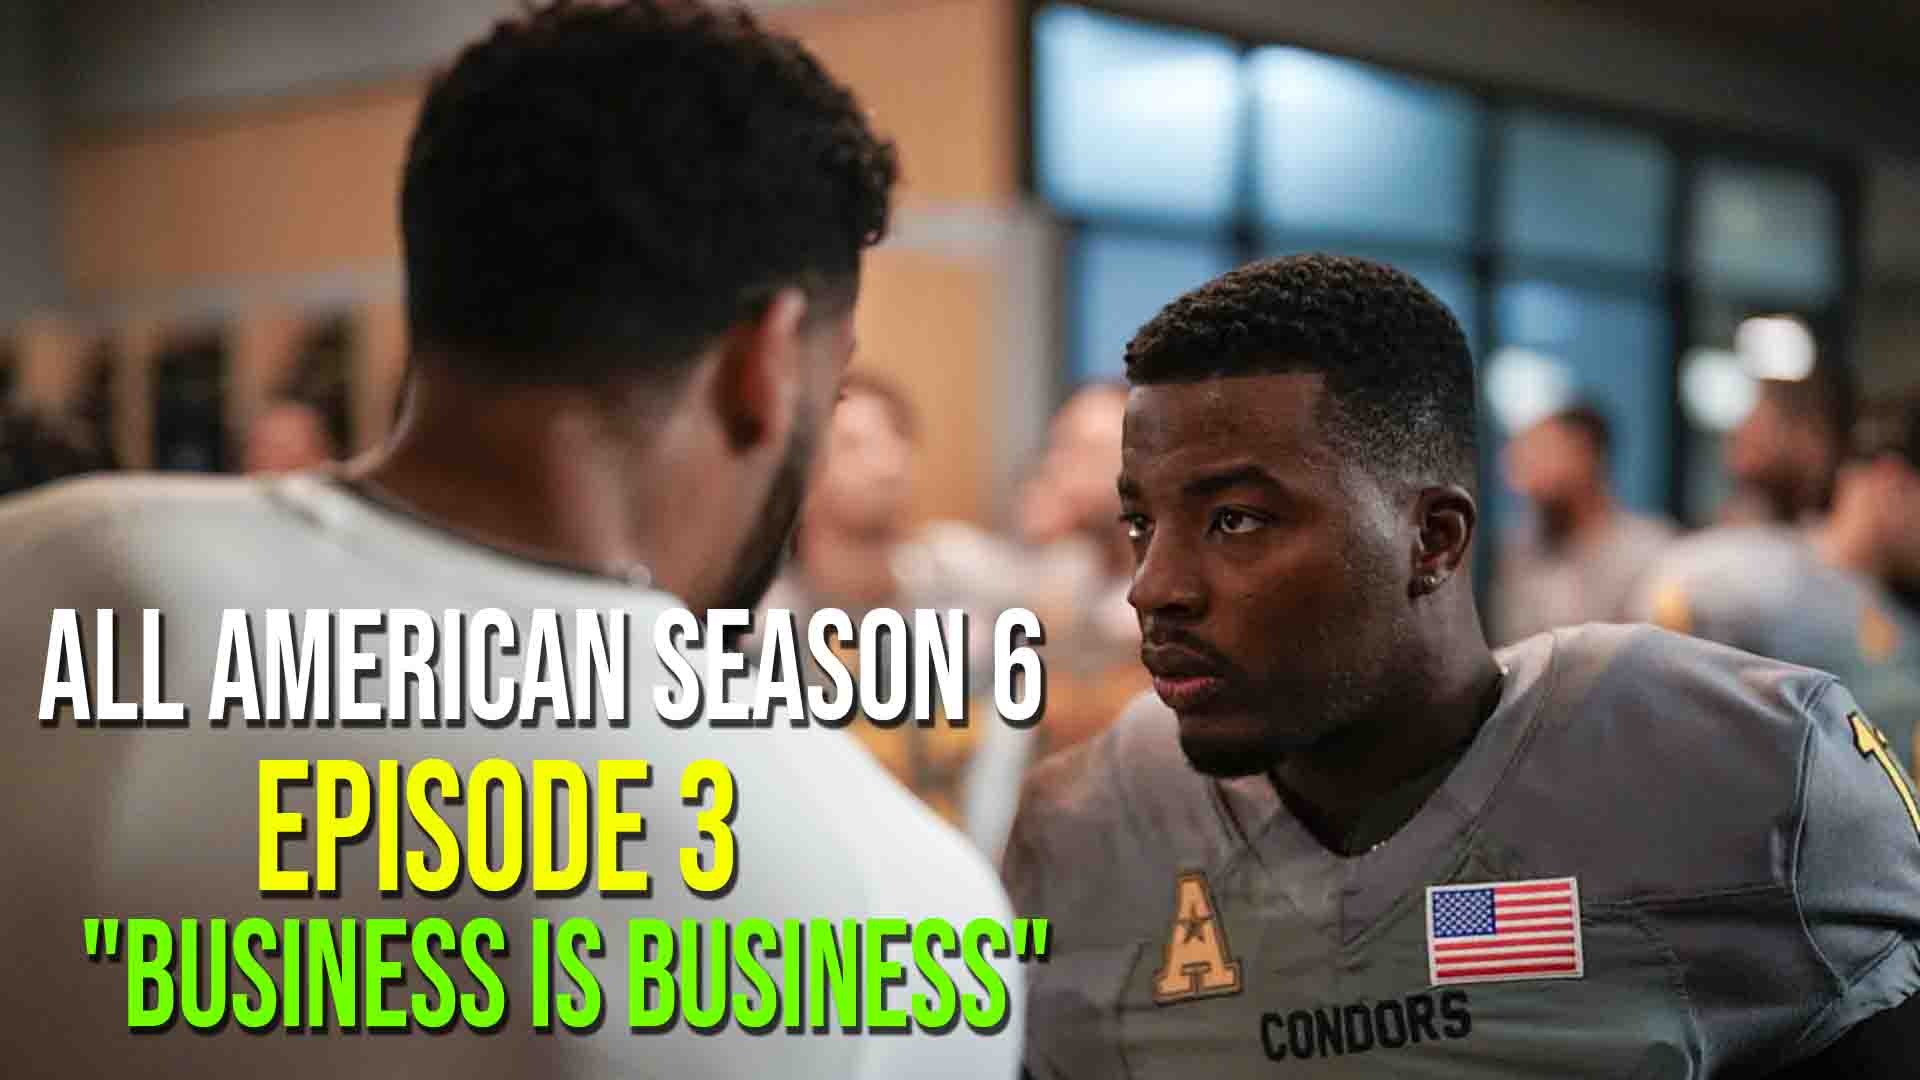 All American Season 6 Episode 3 “Coming Sooner” Than Expected!